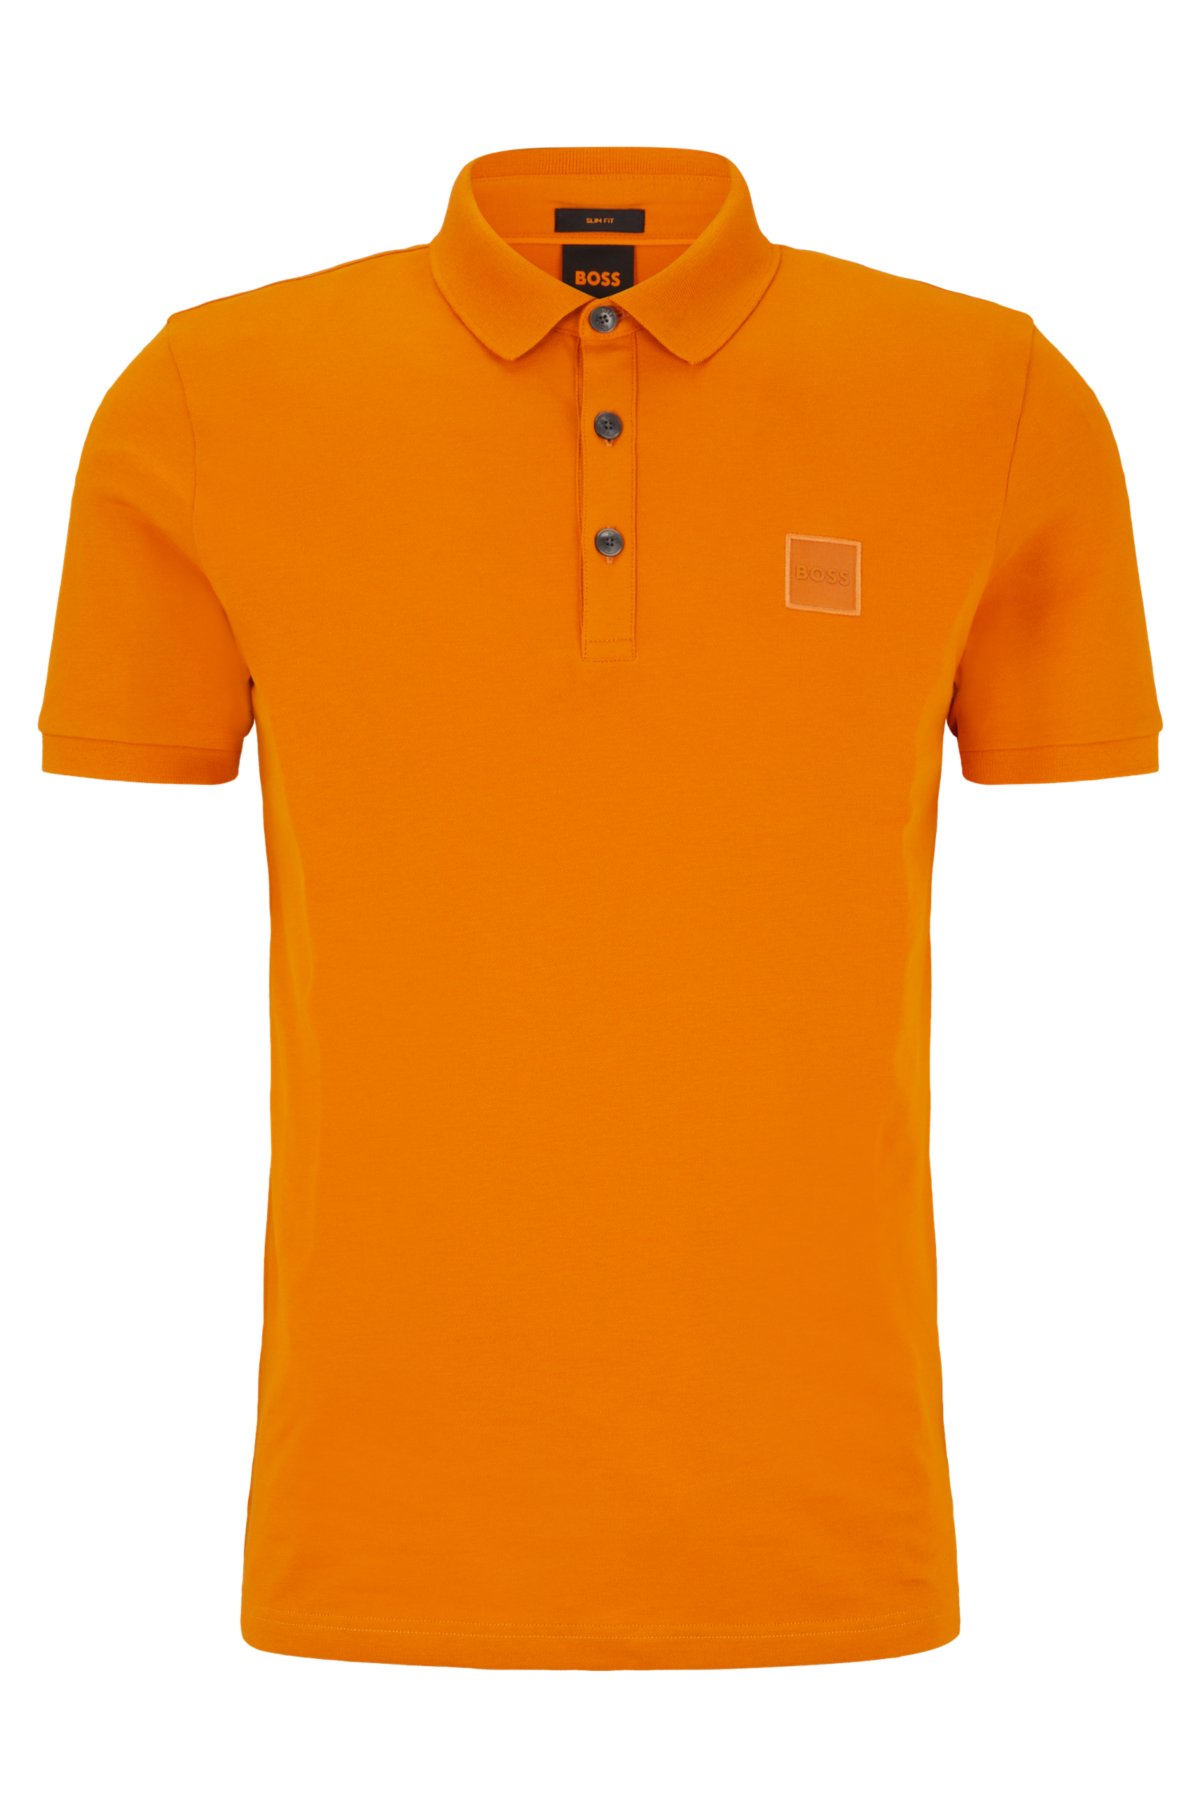 dwaas Brouwerij als BOSS - Stretch-cotton slim-fit polo shirt with logo patch